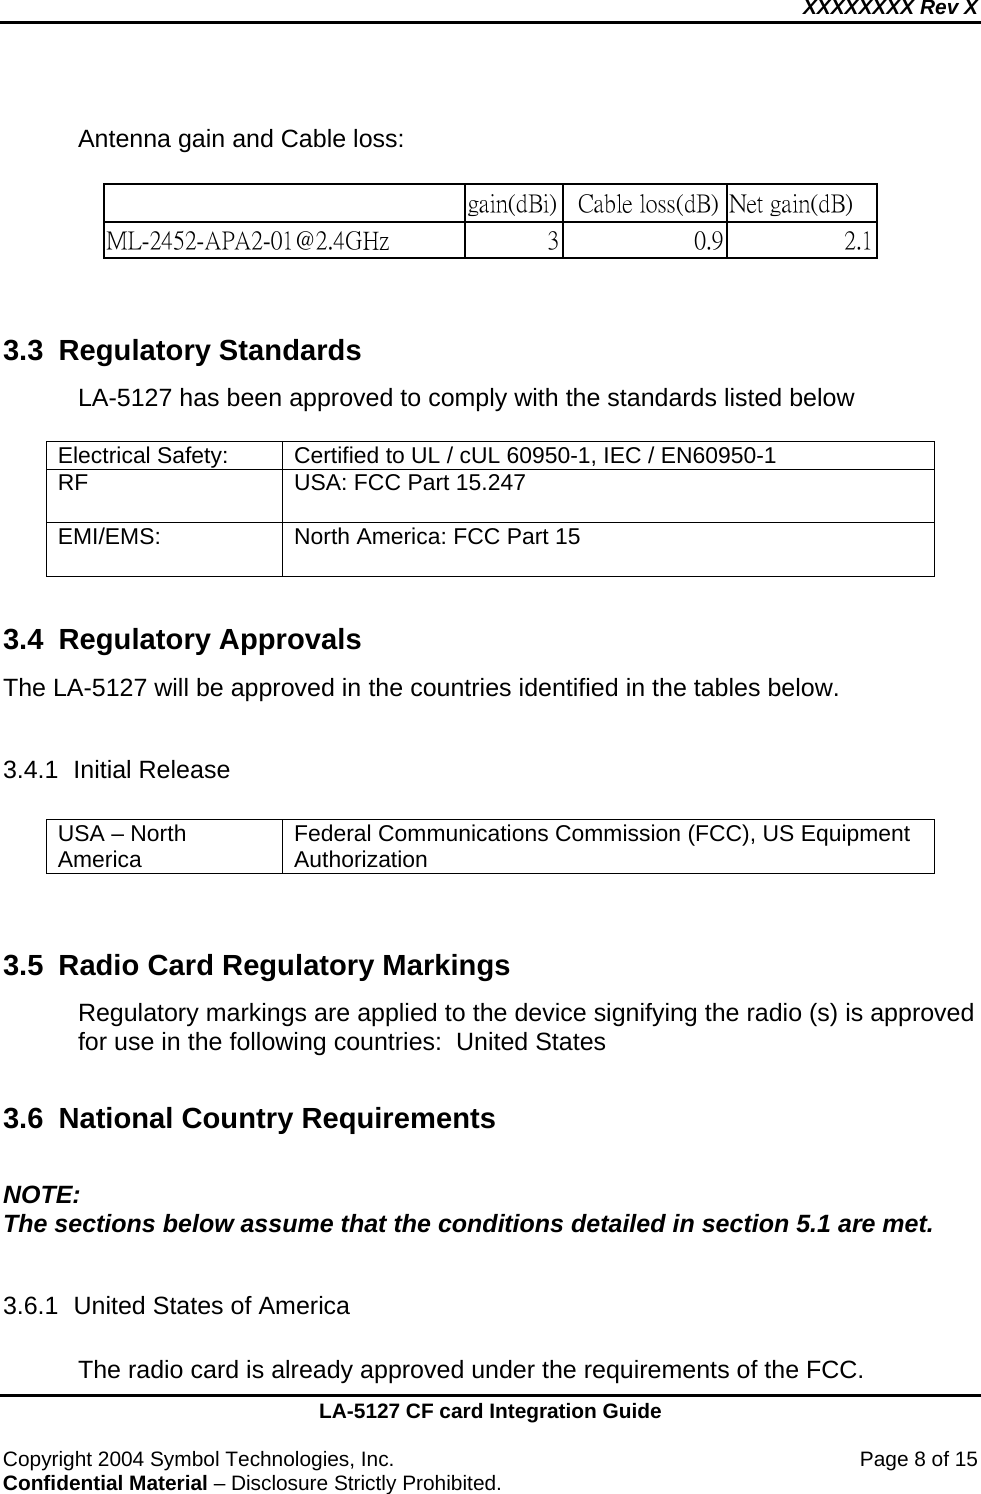 XXXXXXXX Rev X    LA-5127 CF card Integration Guide  Copyright 2004 Symbol Technologies, Inc.    Page 8 of 15 Confidential Material – Disclosure Strictly Prohibited.      Antenna gain and Cable loss:                                                             gain(dBi)   Cable loss(dB) Net gain(dB) ML-2452-APA2-01@2.4GHz   3 0.9 2.1   3.3 Regulatory Standards LA-5127 has been approved to comply with the standards listed below   Electrical Safety:  Certified to UL / cUL 60950-1, IEC / EN60950-1 RF  USA: FCC Part 15.247  EMI/EMS:   North America: FCC Part 15   3.4 Regulatory Approvals The LA-5127 will be approved in the countries identified in the tables below.    3.4.1 Initial Release  USA – North America  Federal Communications Commission (FCC), US Equipment Authorization   3.5  Radio Card Regulatory Markings Regulatory markings are applied to the device signifying the radio (s) is approved for use in the following countries:  United States  3.6 National Country Requirements  NOTE: The sections below assume that the conditions detailed in section 5.1 are met.  3.6.1  United States of America  The radio card is already approved under the requirements of the FCC. 